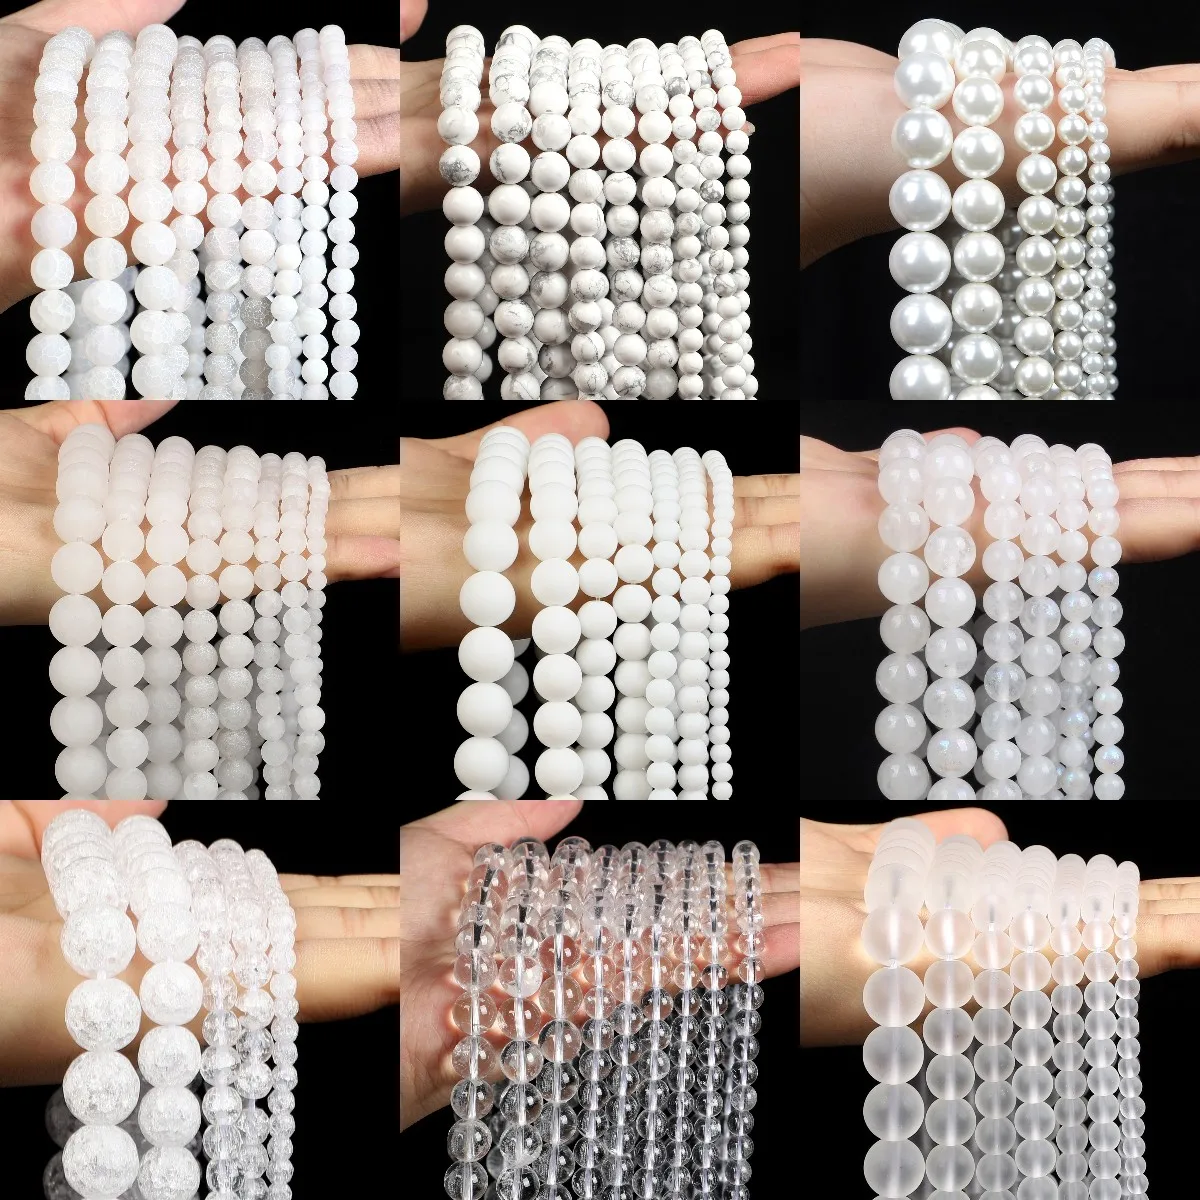 Natural Stone Beads White Moonstone Amazonite Clear Agate Shell Bead Loose Spacer Beads for Jewelry Making DIY Bracelet Necklace